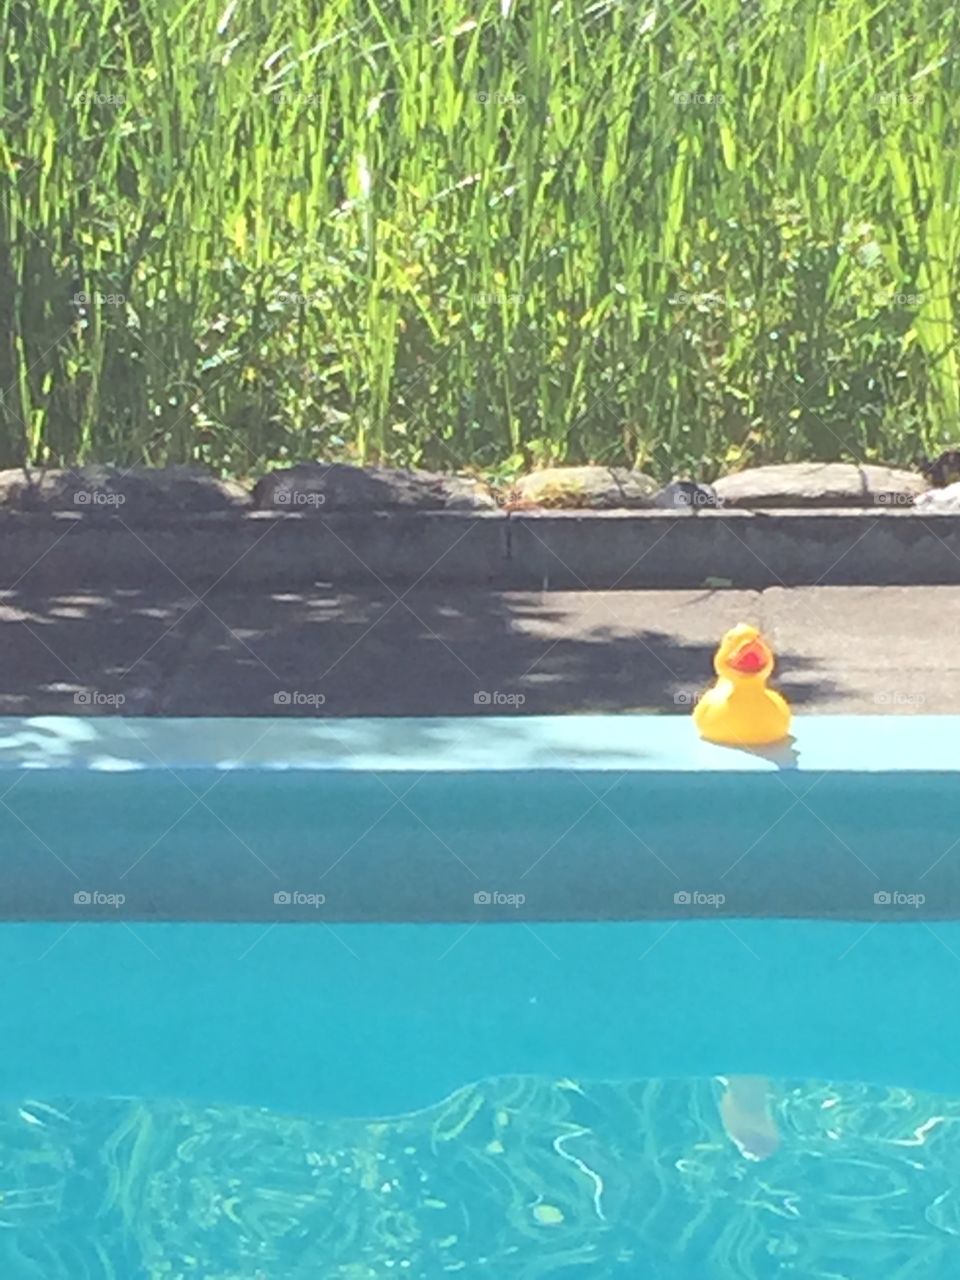 Quietscheente goes swimming - rubber duck at the pool